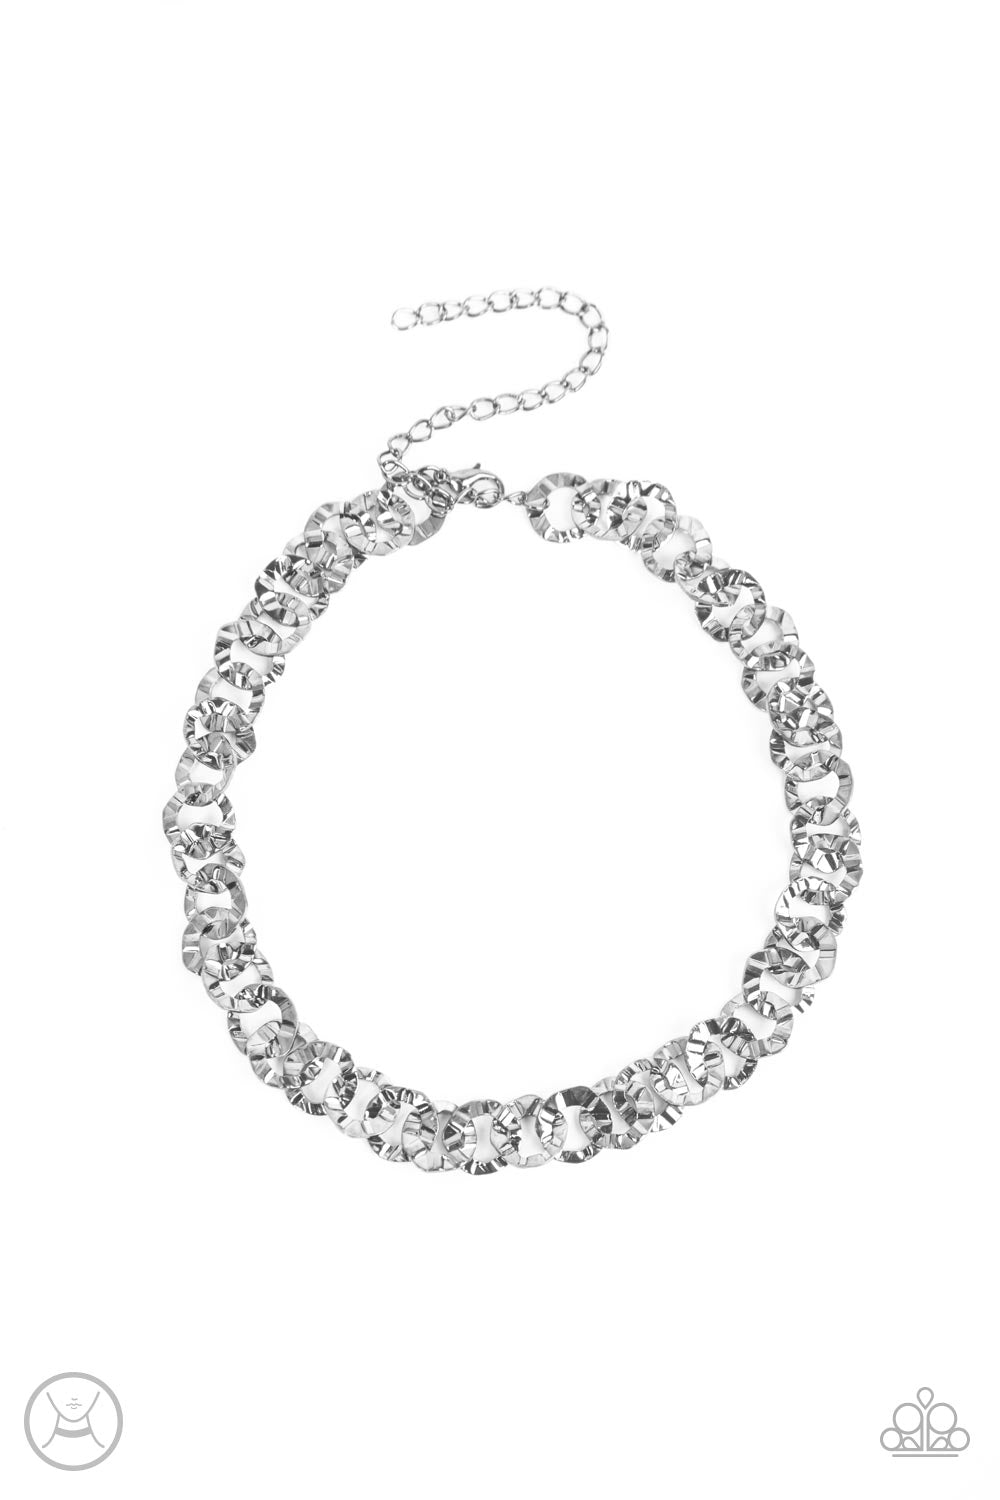 Rebel Grit Silver Necklace - Paparazzi Accessories